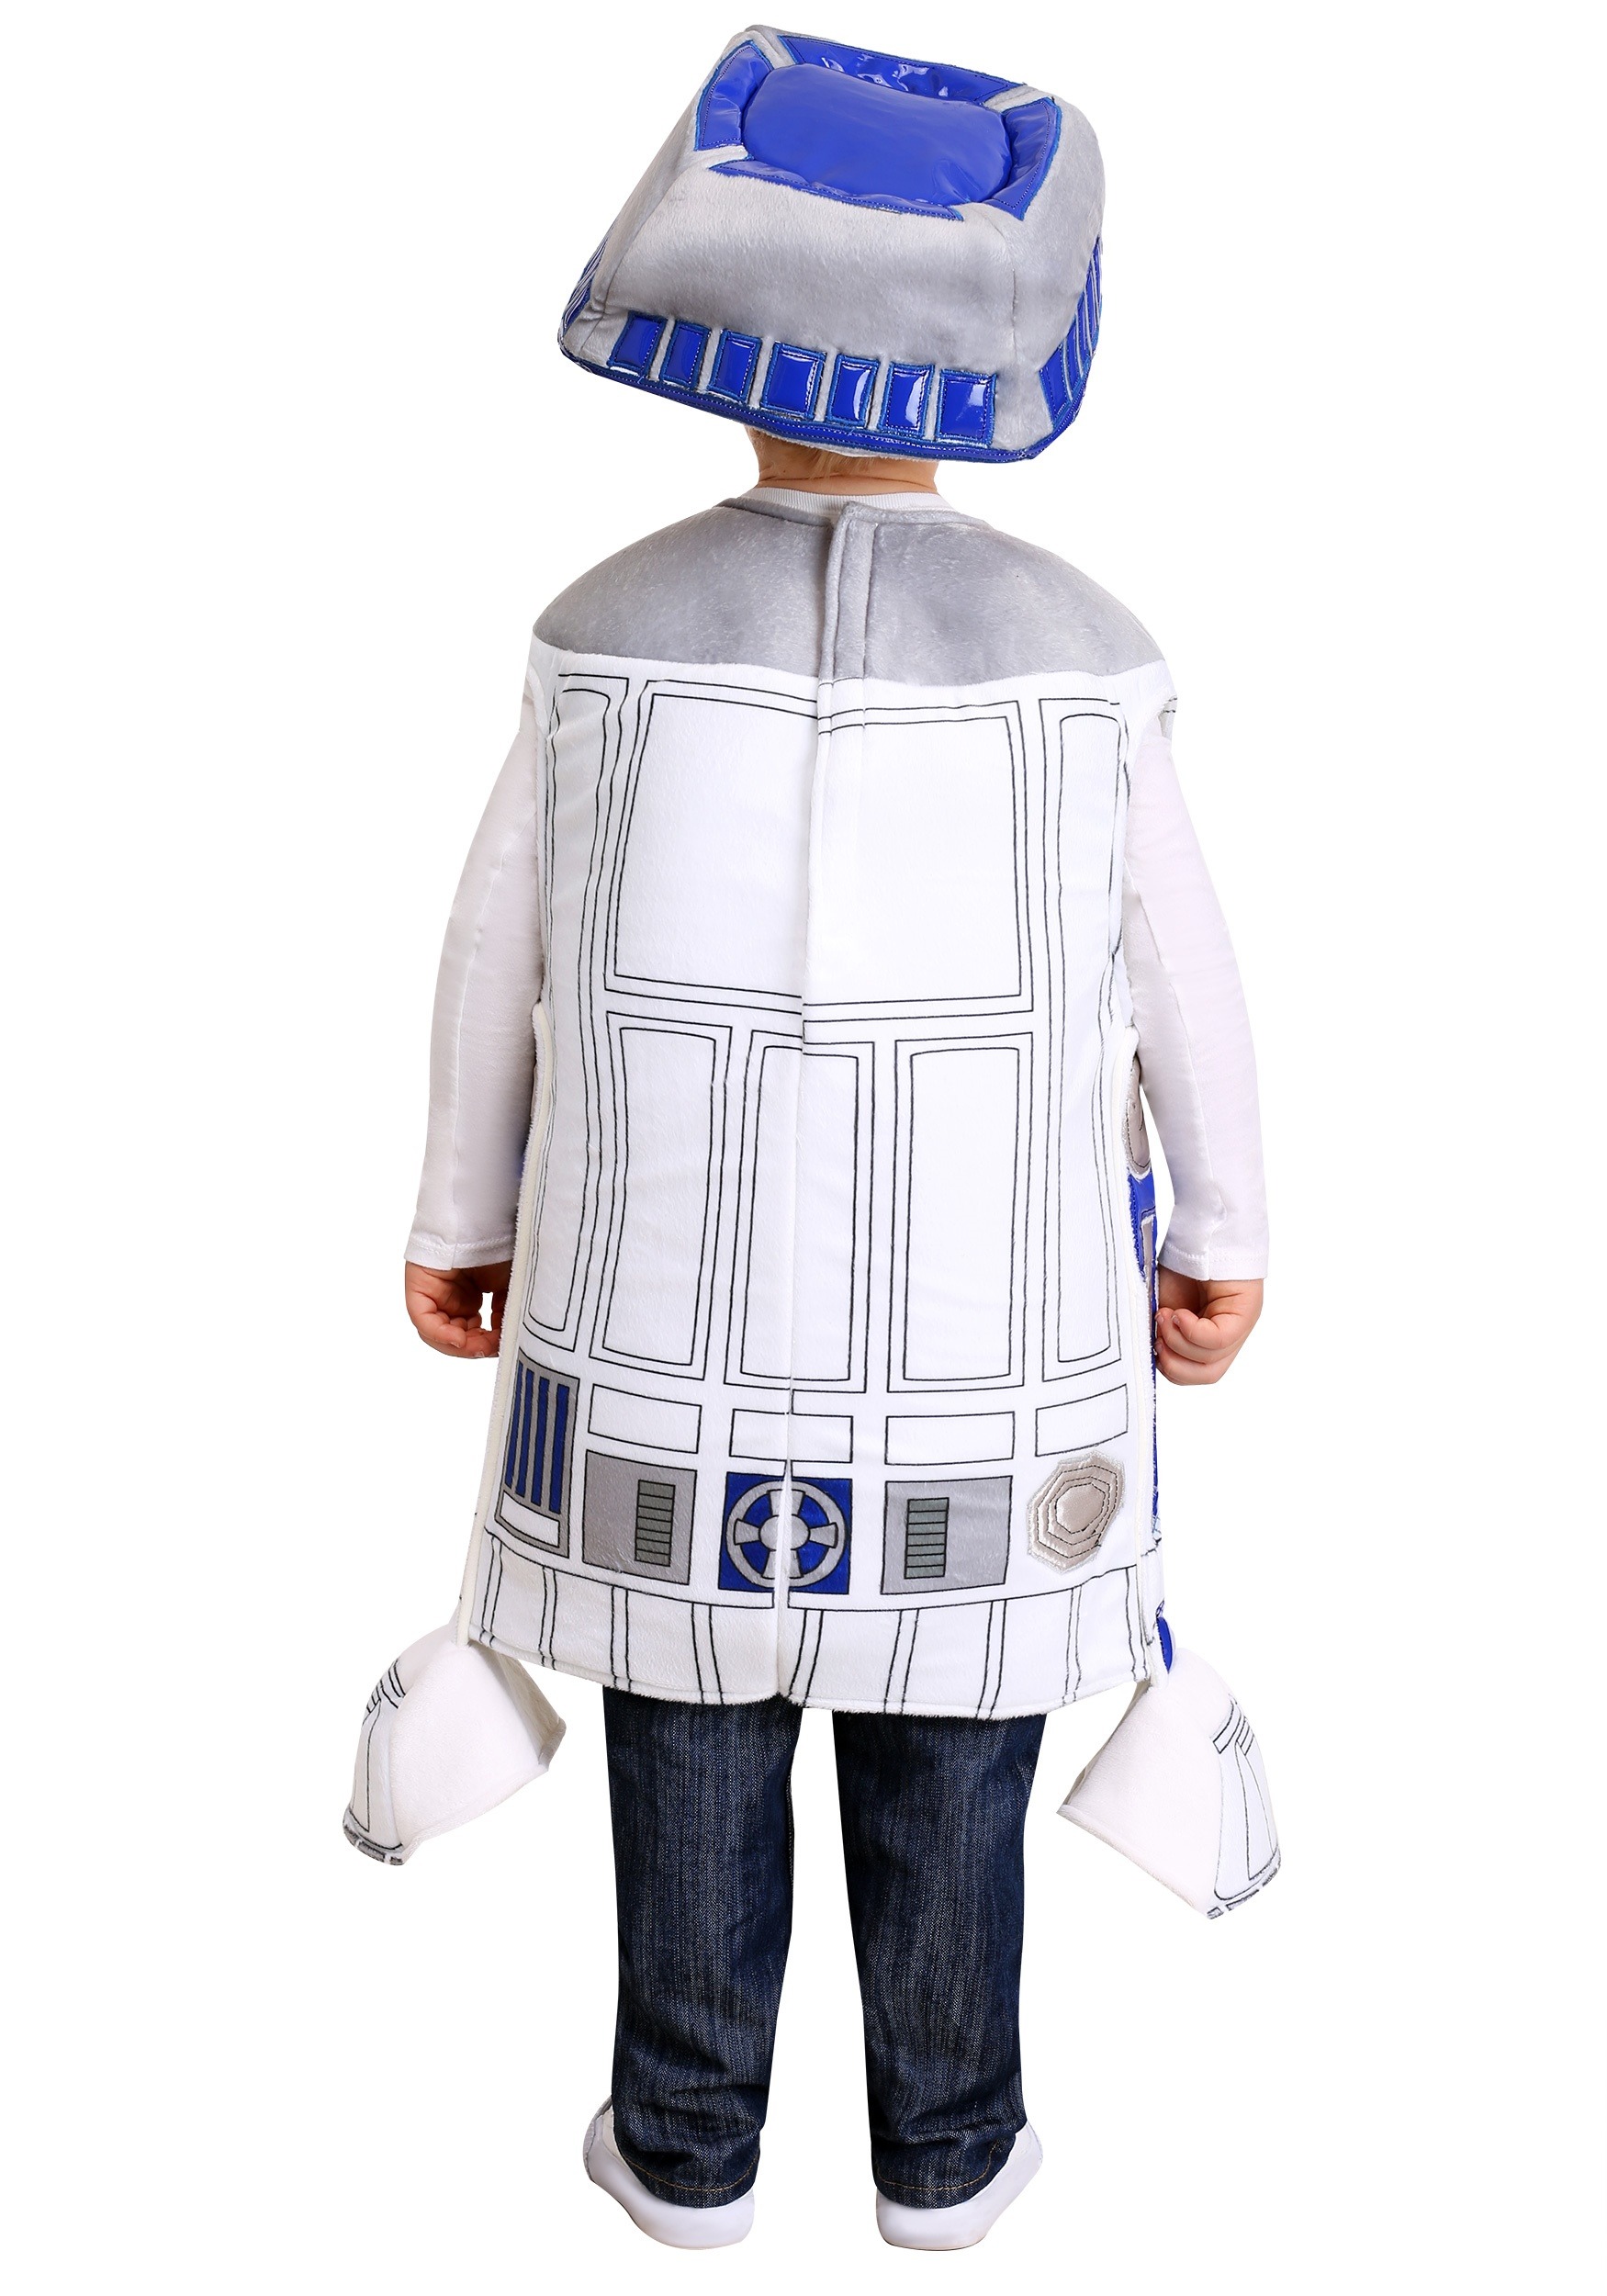 Toddler Star Wars R2-D2 Costume | Sci Fi Costume | Exclusive